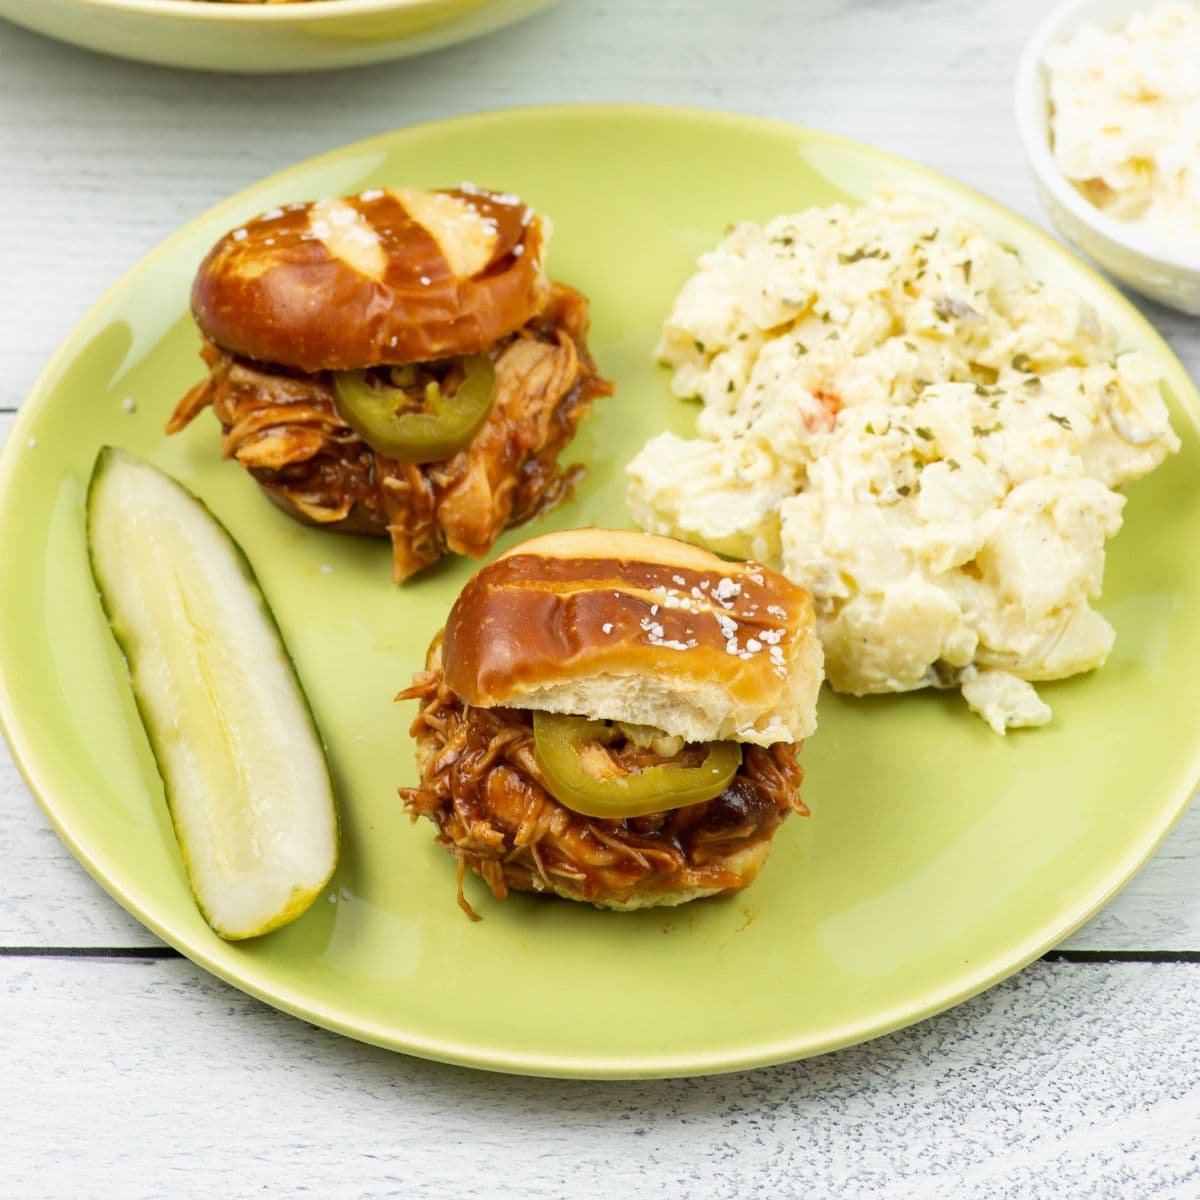 BBQ Cranberry Chicken Sliders served with potato salad, cole slaw and a pickle wedge on a dinner plate.